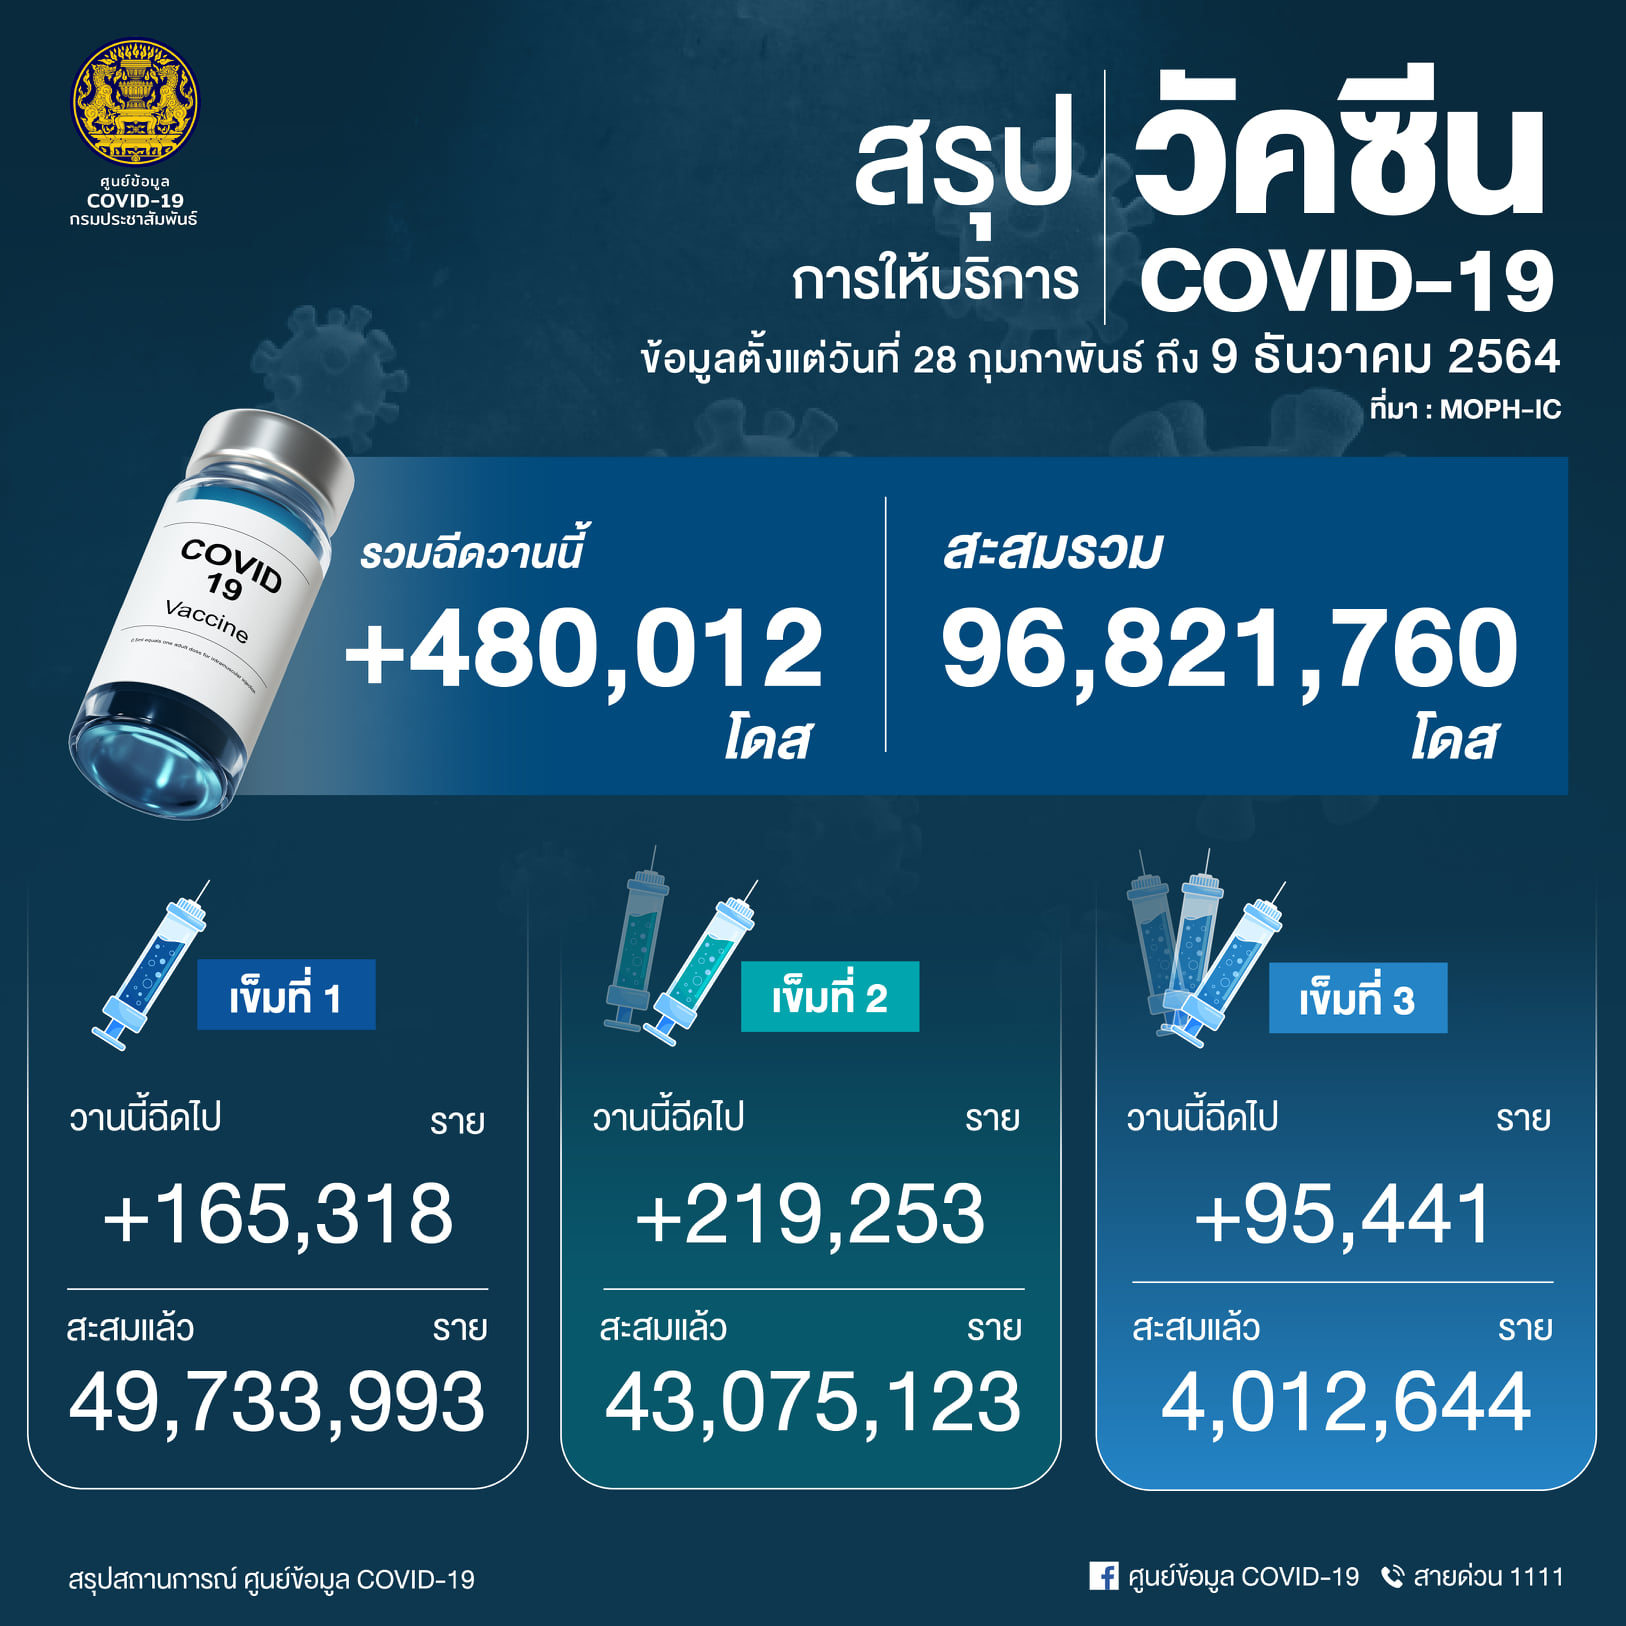 , RECAP: Thailand reports 4,193 daily Covid-19 infections with 28 additional deaths today, We love Thailand